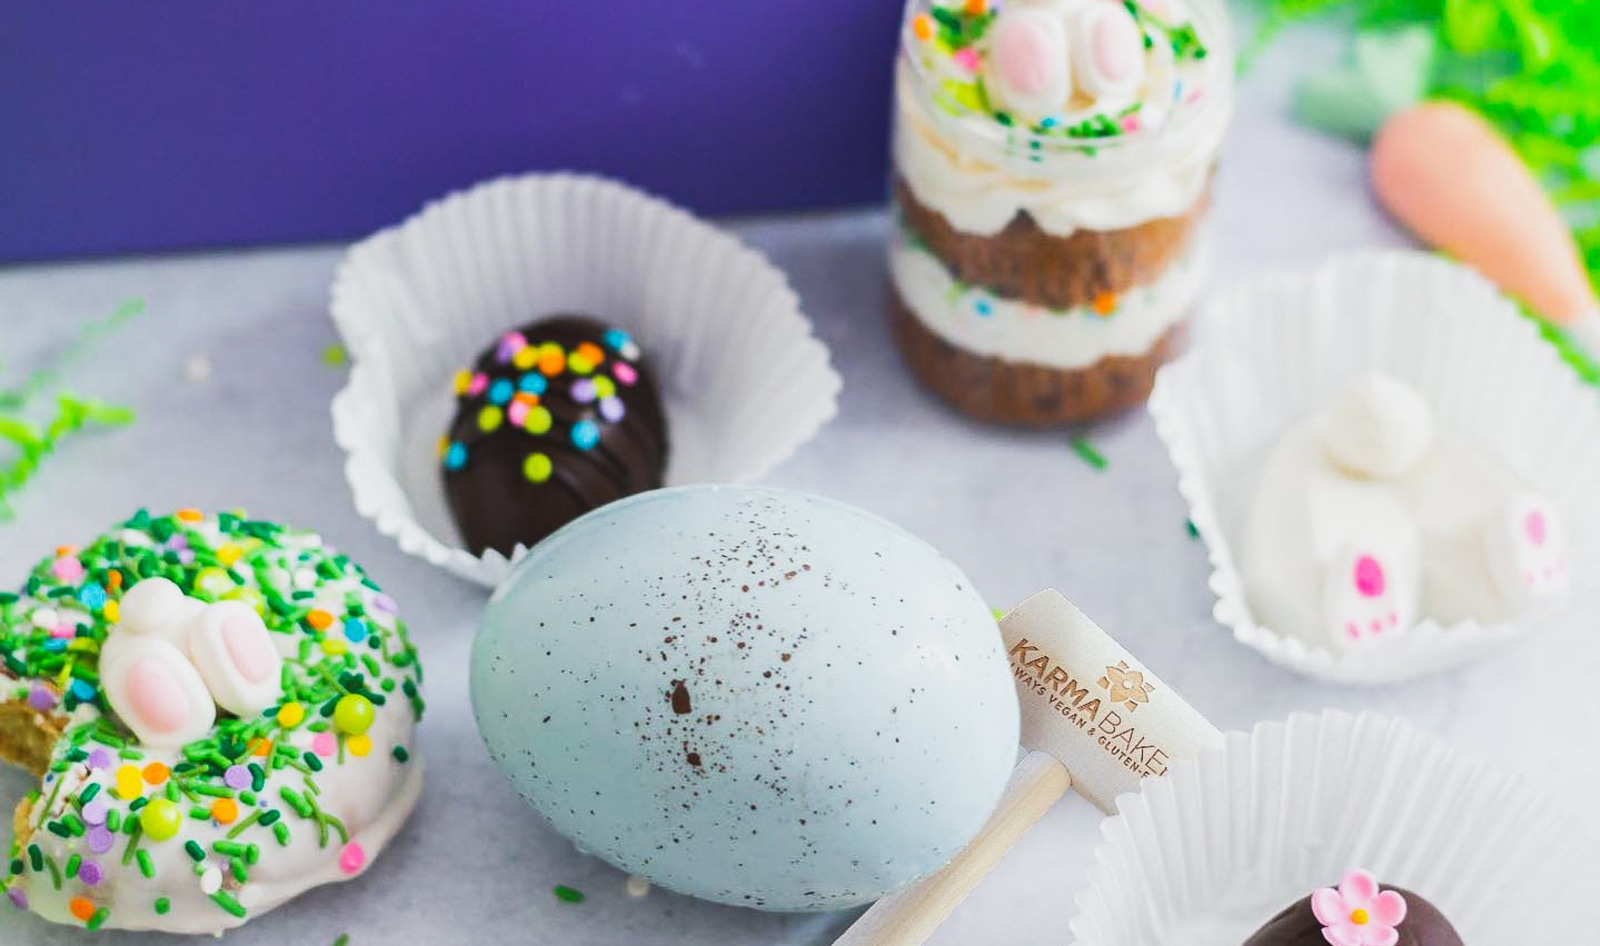 13 Vegan Easter Candies We Want To Find in Our Easter Basket